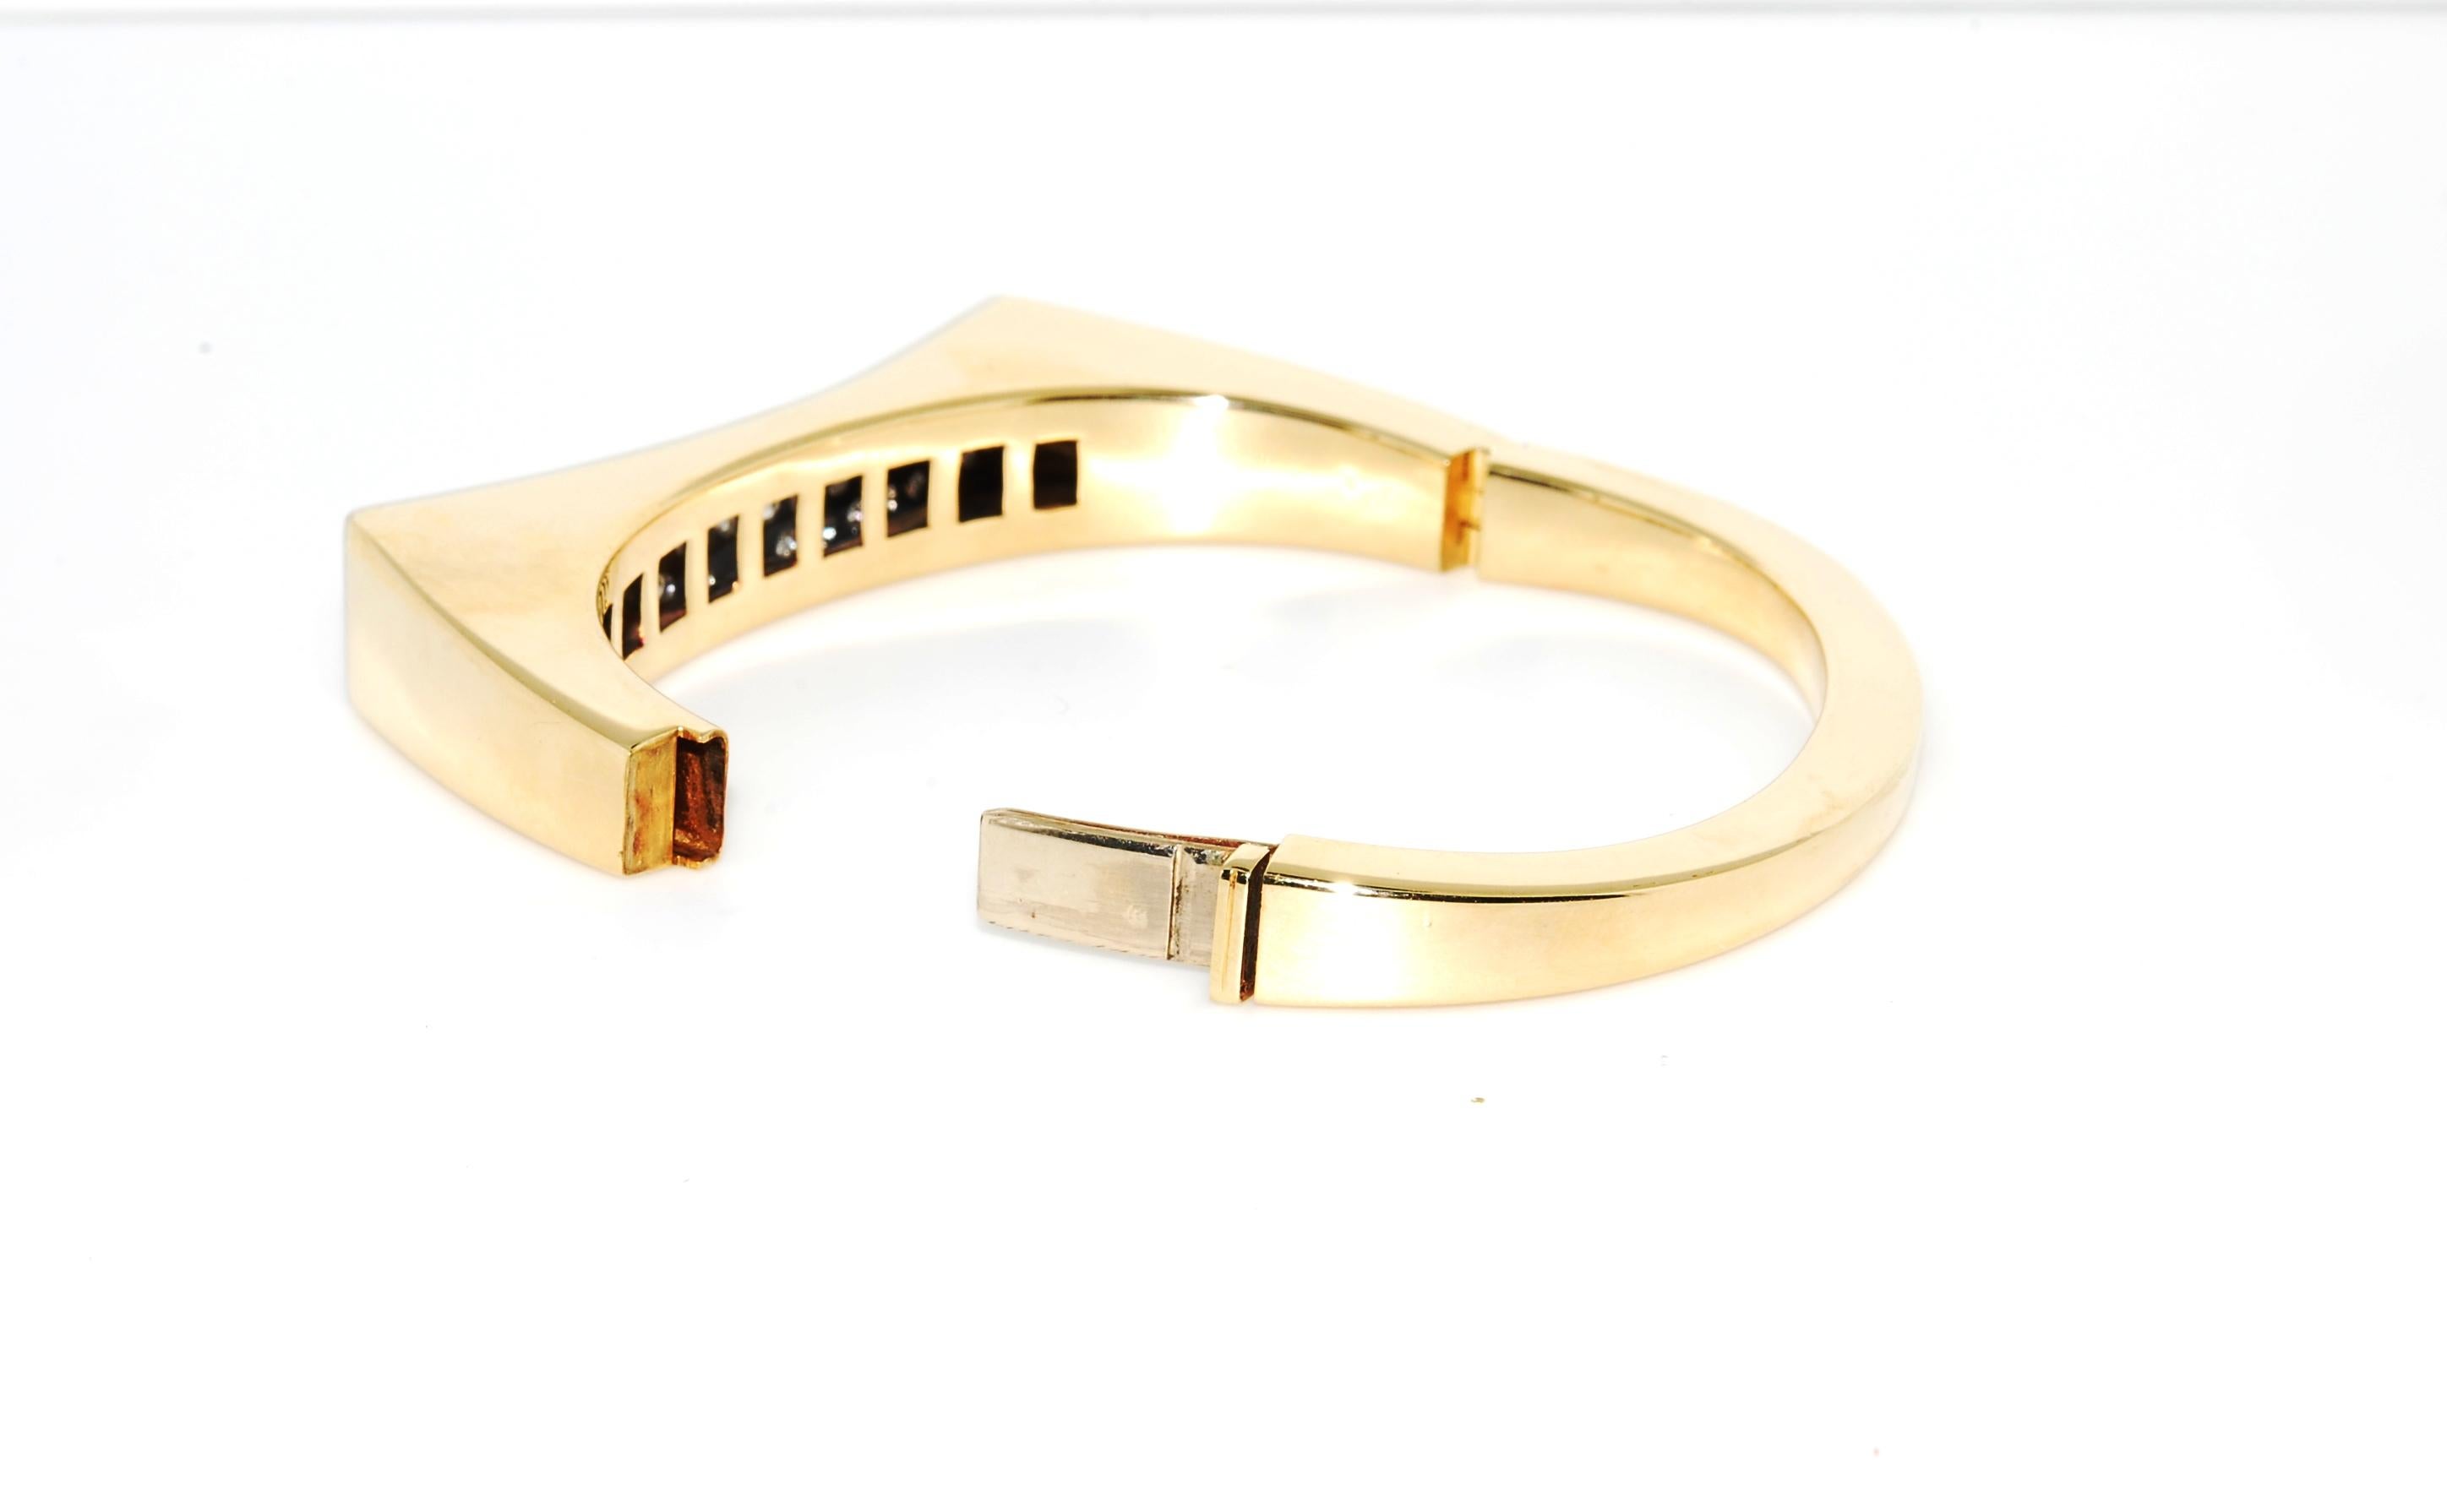 Classy  Italian 14 karat yellow gold concave shape cuff bracelet. Contains 50 round diamonds 4-prong set each in 3 rows. Very secure clasp. Retro and timeless style. Almost 4 carats makes a statement - yet understated. Simply elegant and radiates